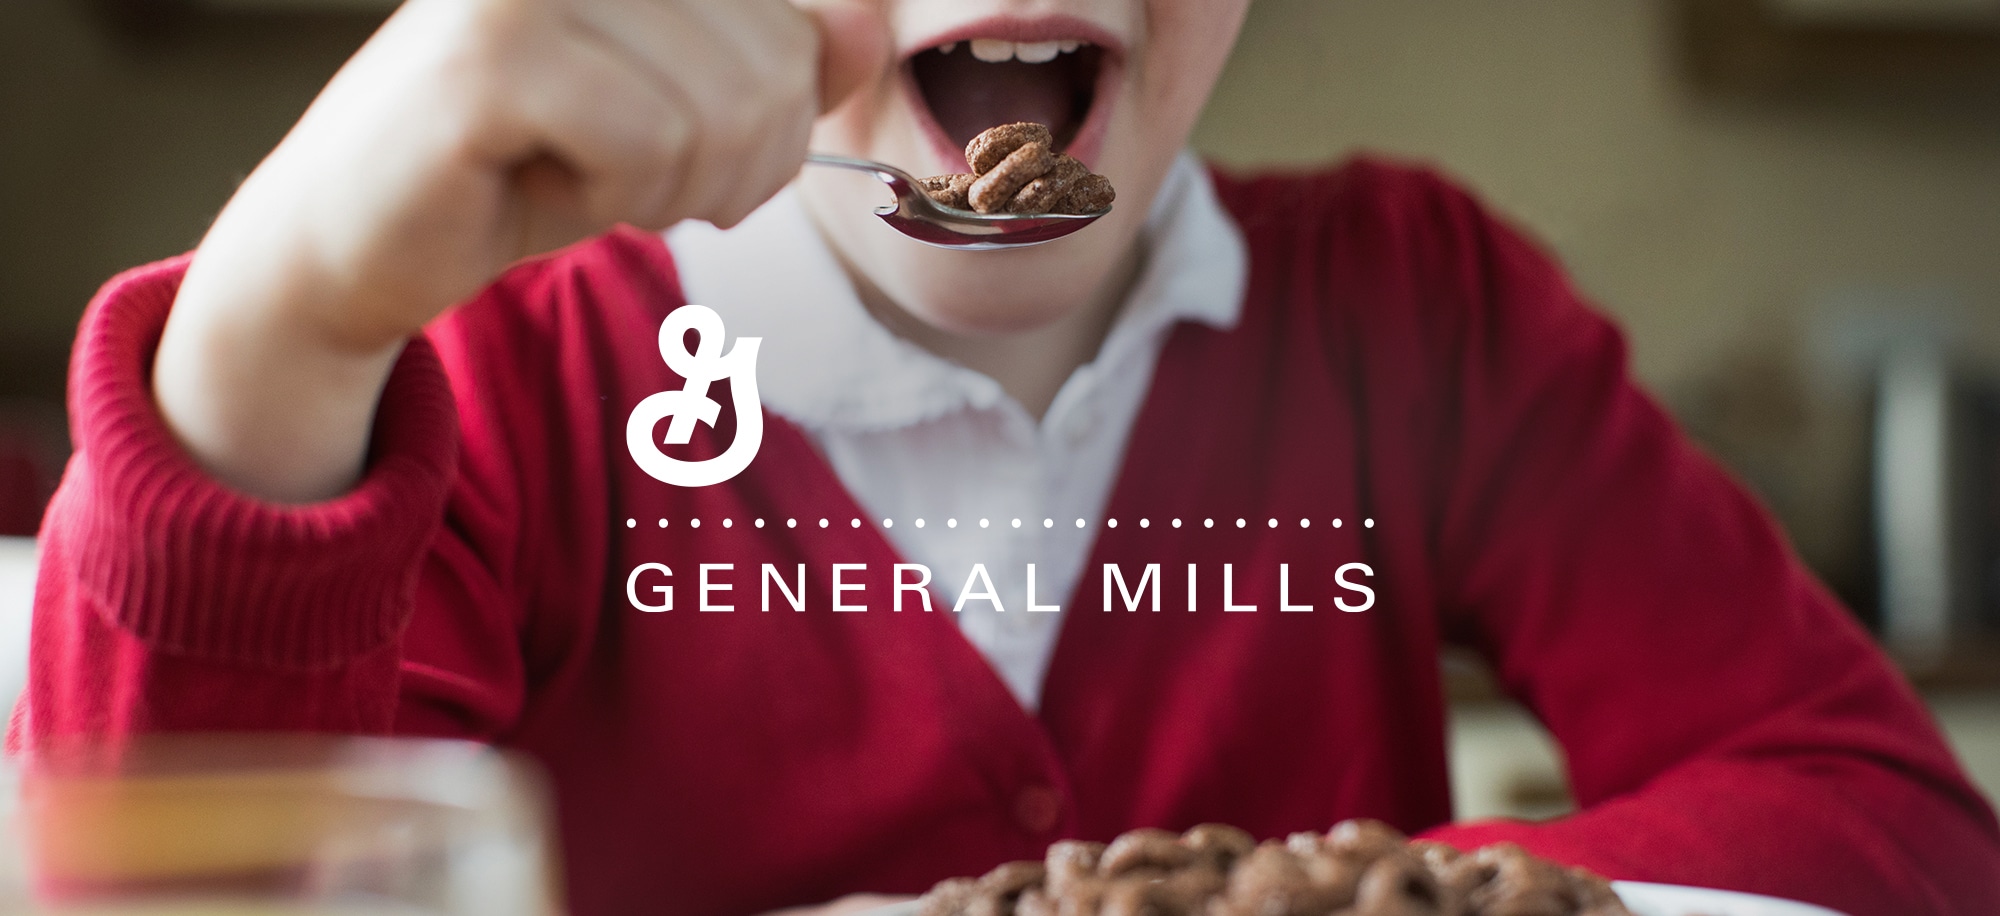 An insights ecosystem for General Mills